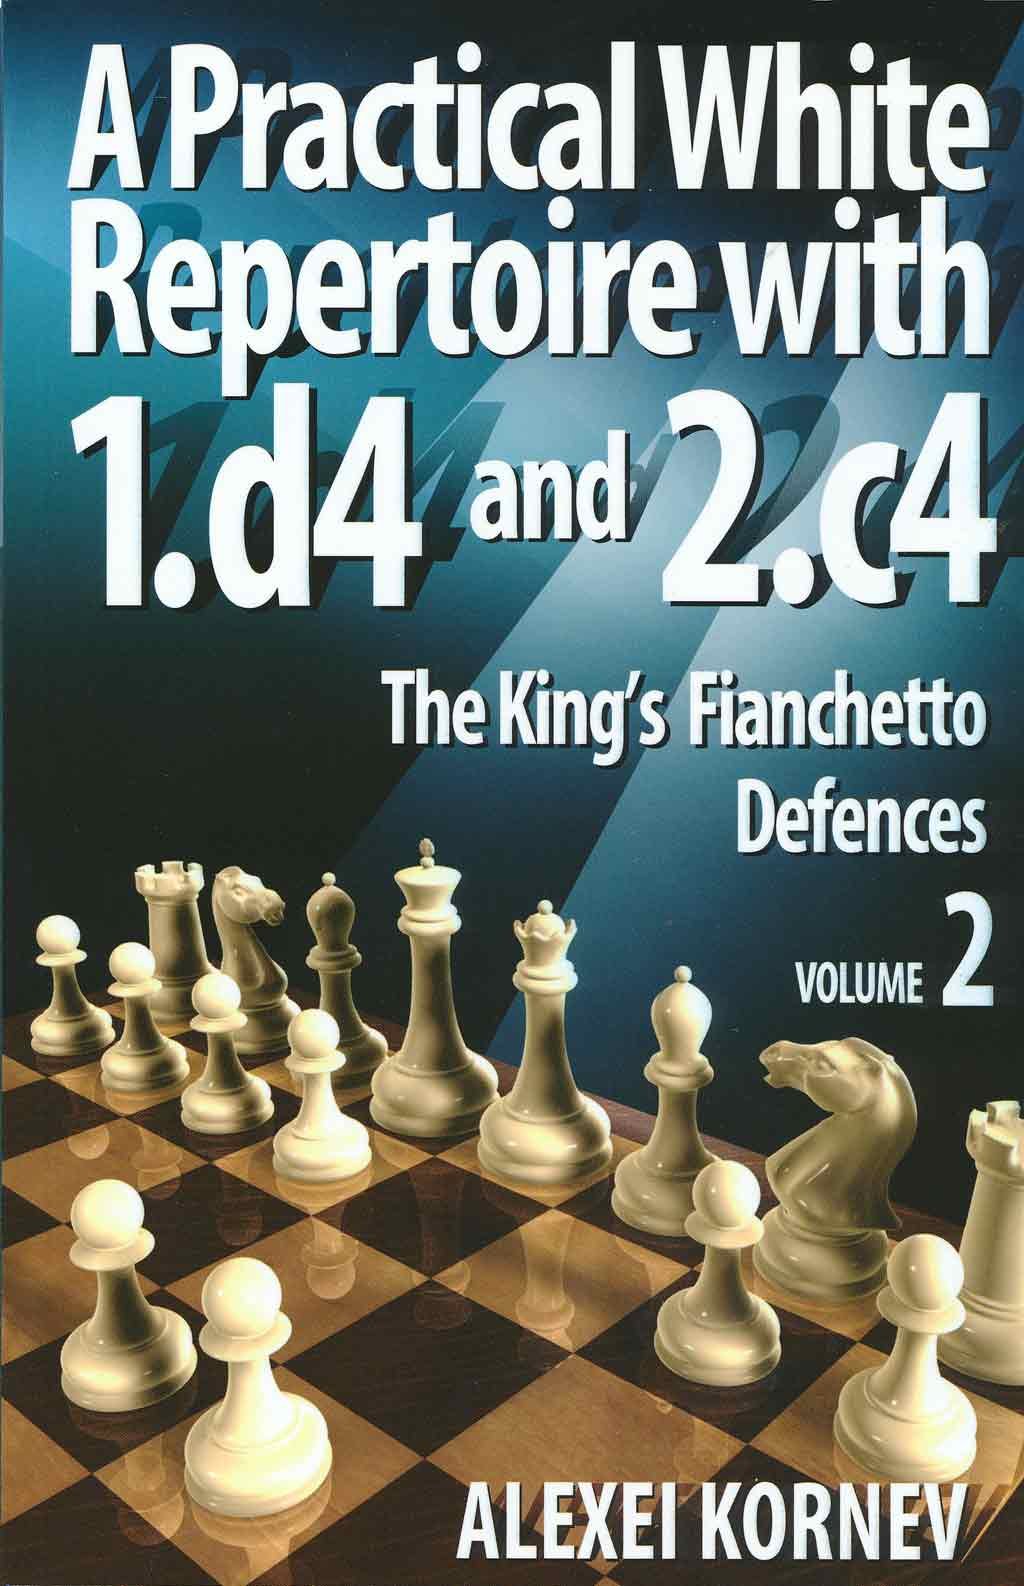 A Pratical White Repertoire with 1.d4 and 2.c4 - The King´s Fianchetto Defences Vol. 2